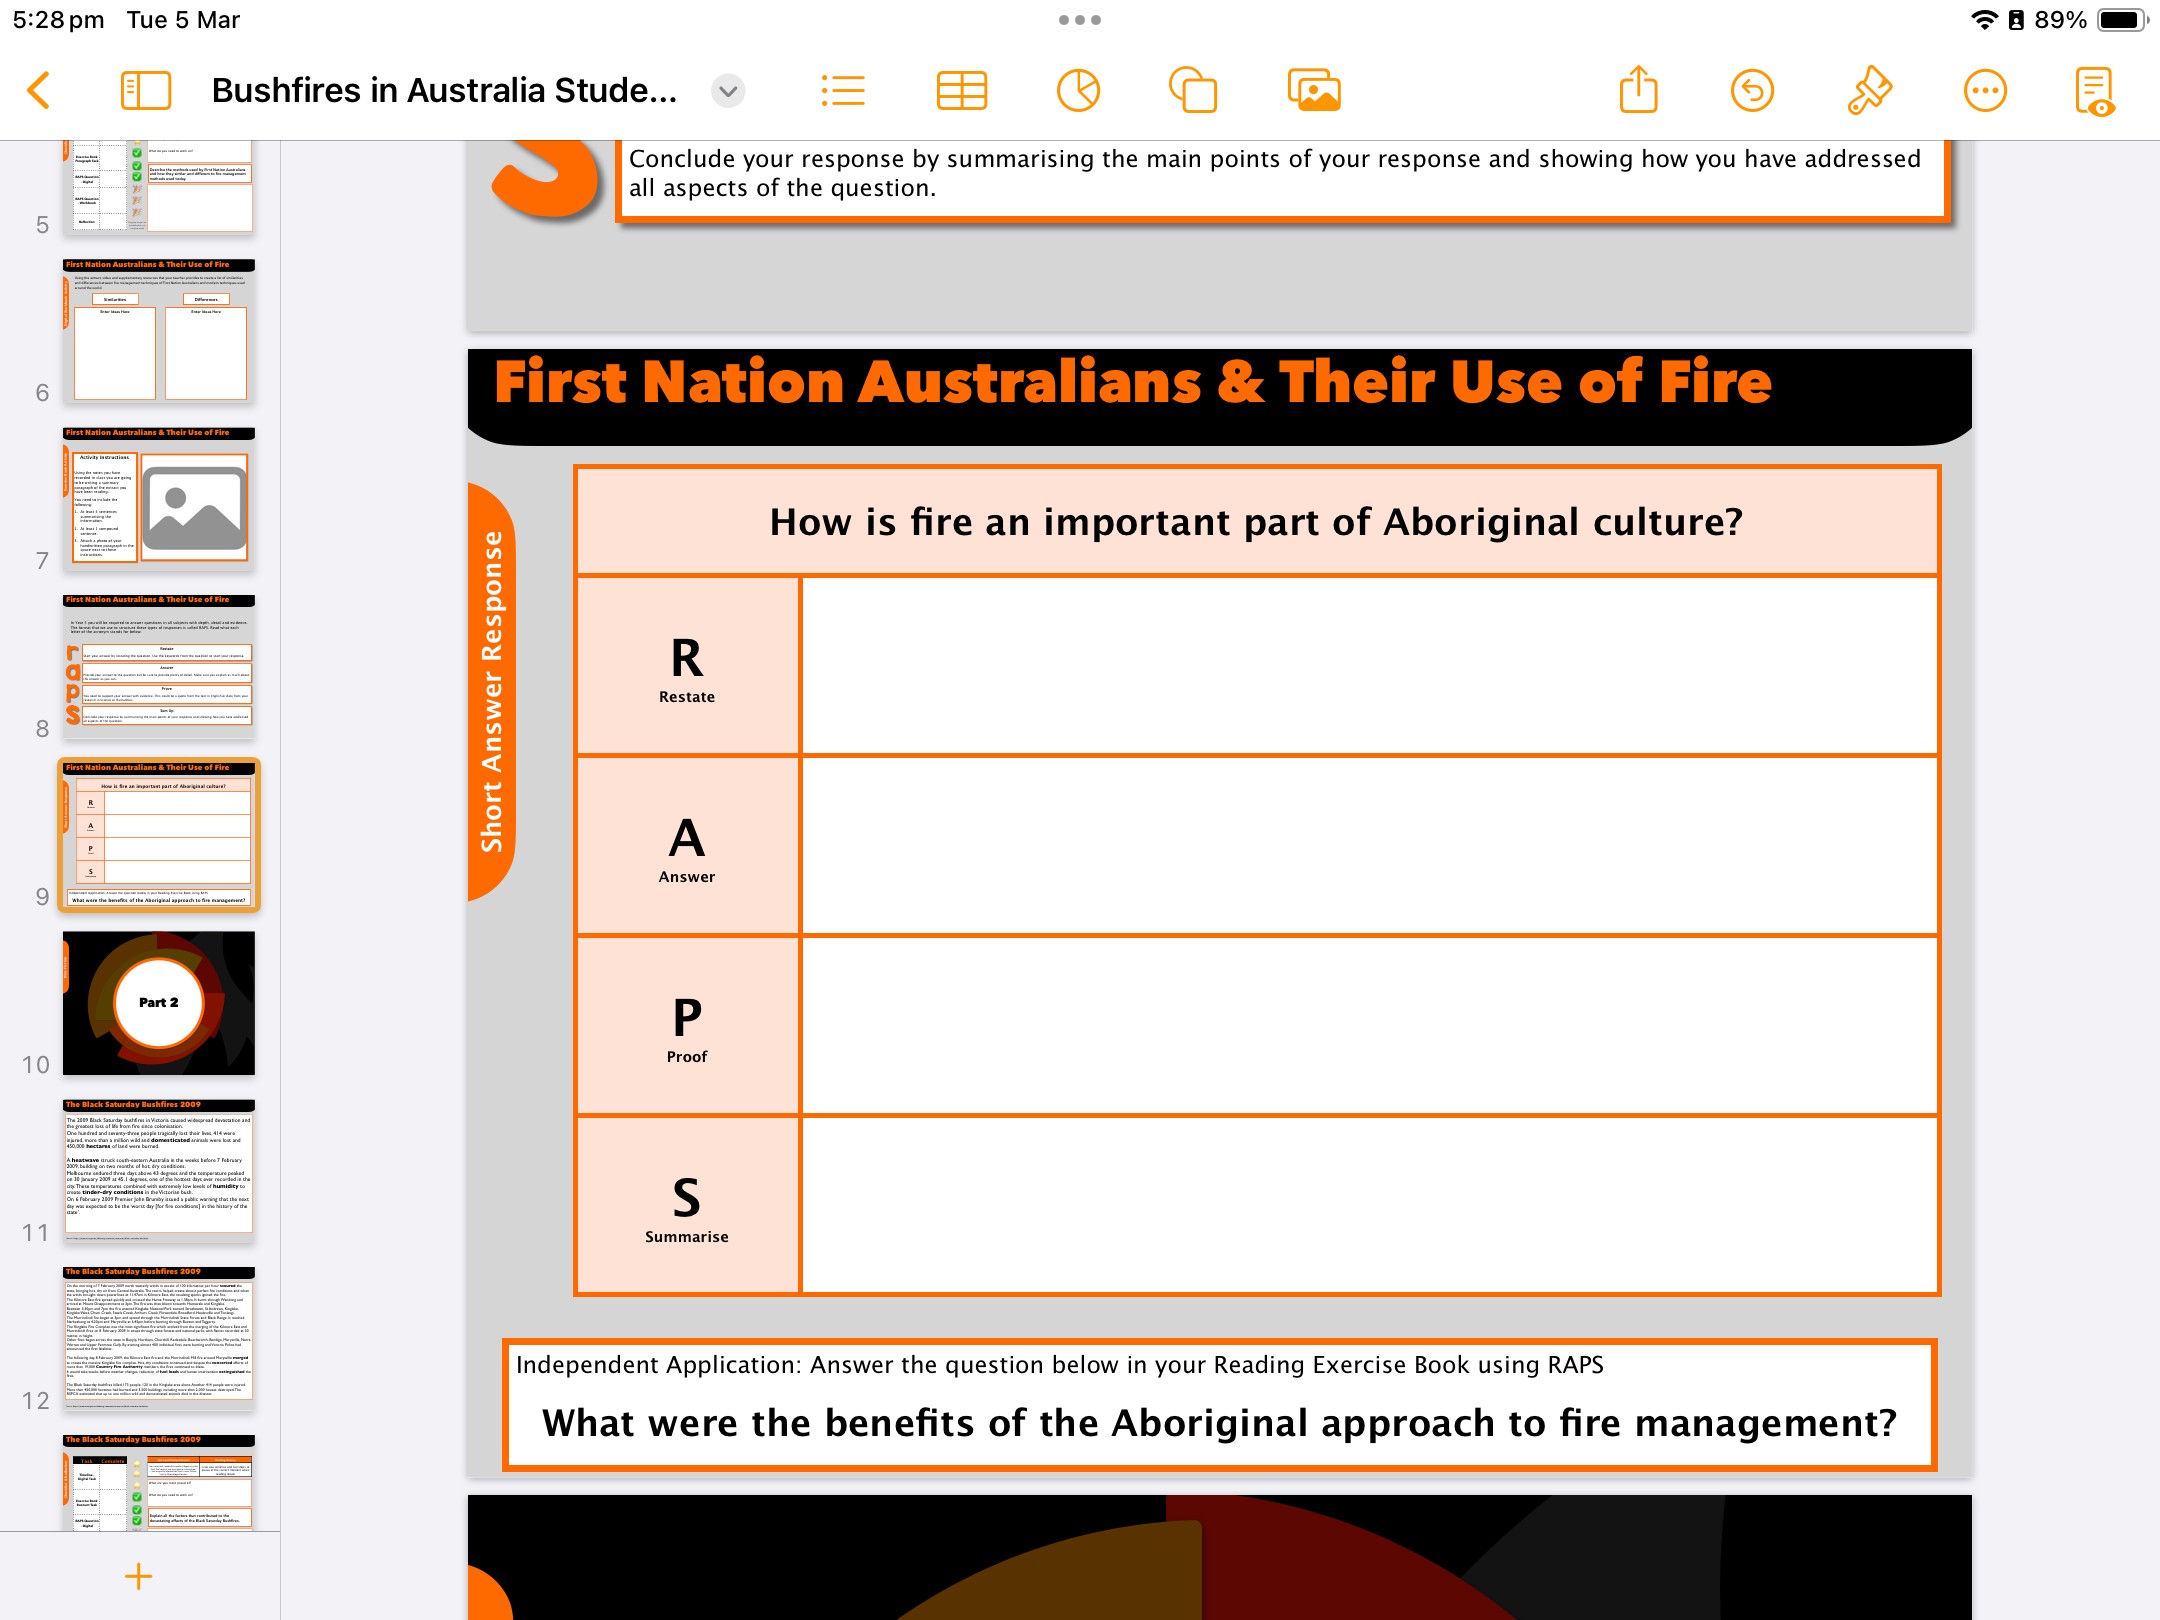 Another example of an activity page from the workbook. This time a template for short answer responses.